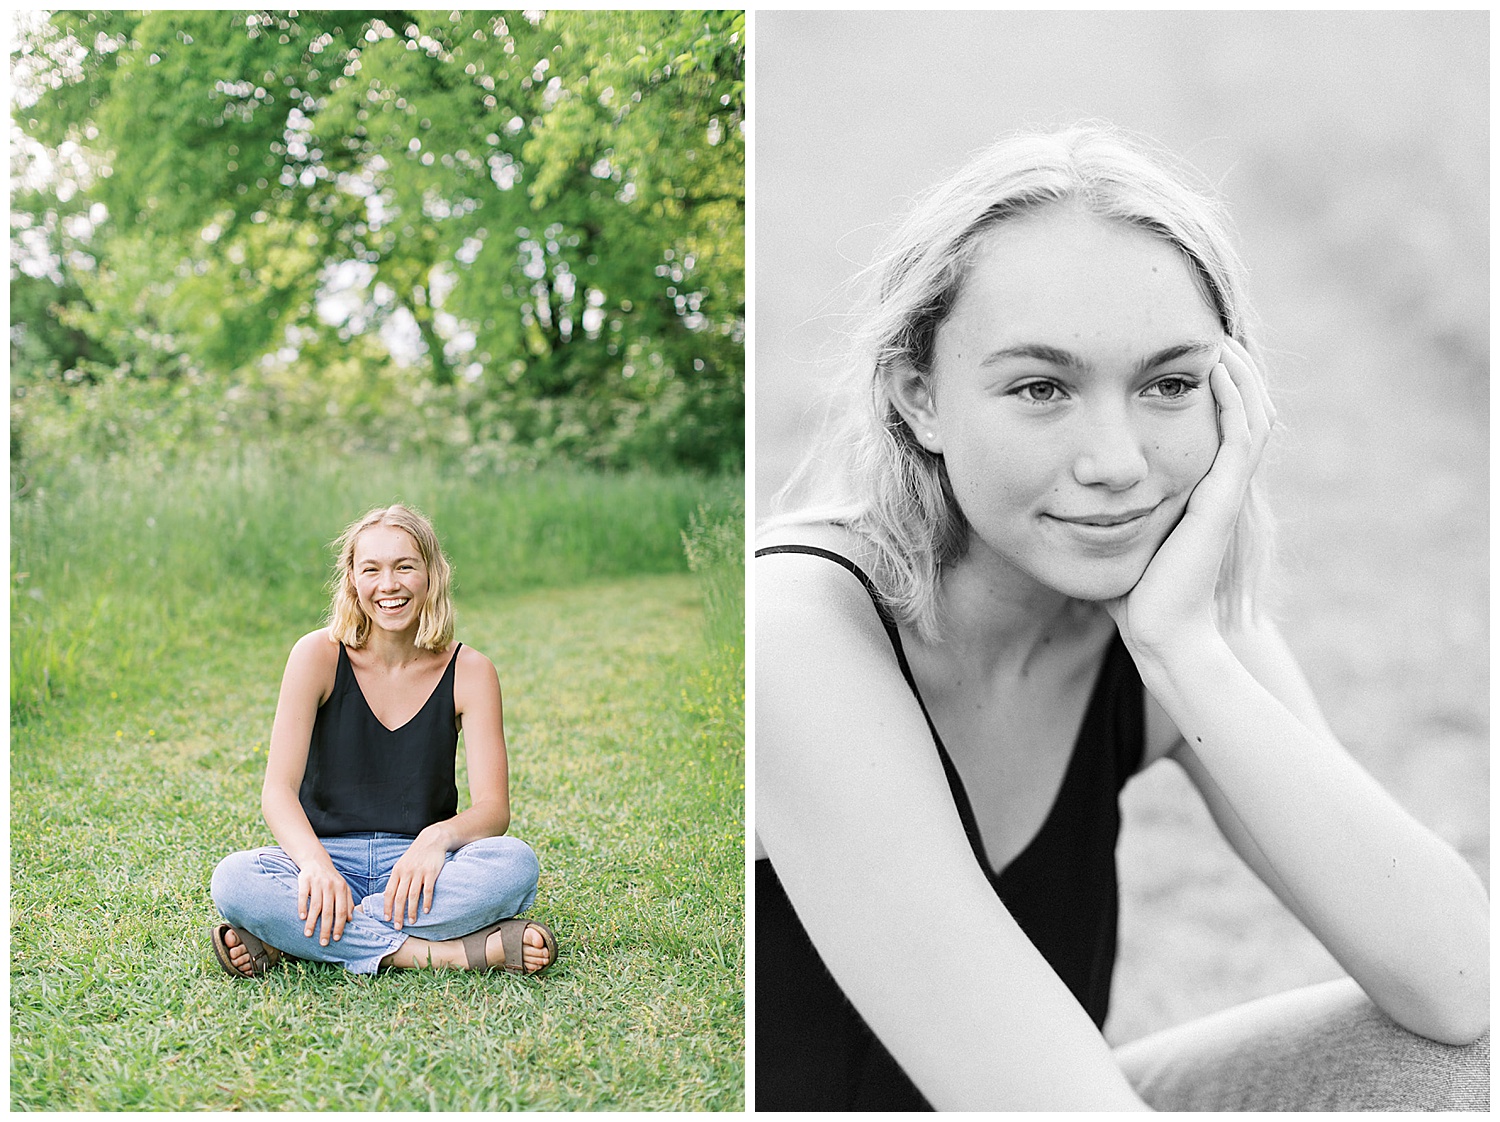 Beautiful organic outdoor Seven Islands State Birding Park senior portrait session in the spring/summer. Image by Holly Michon Photography.